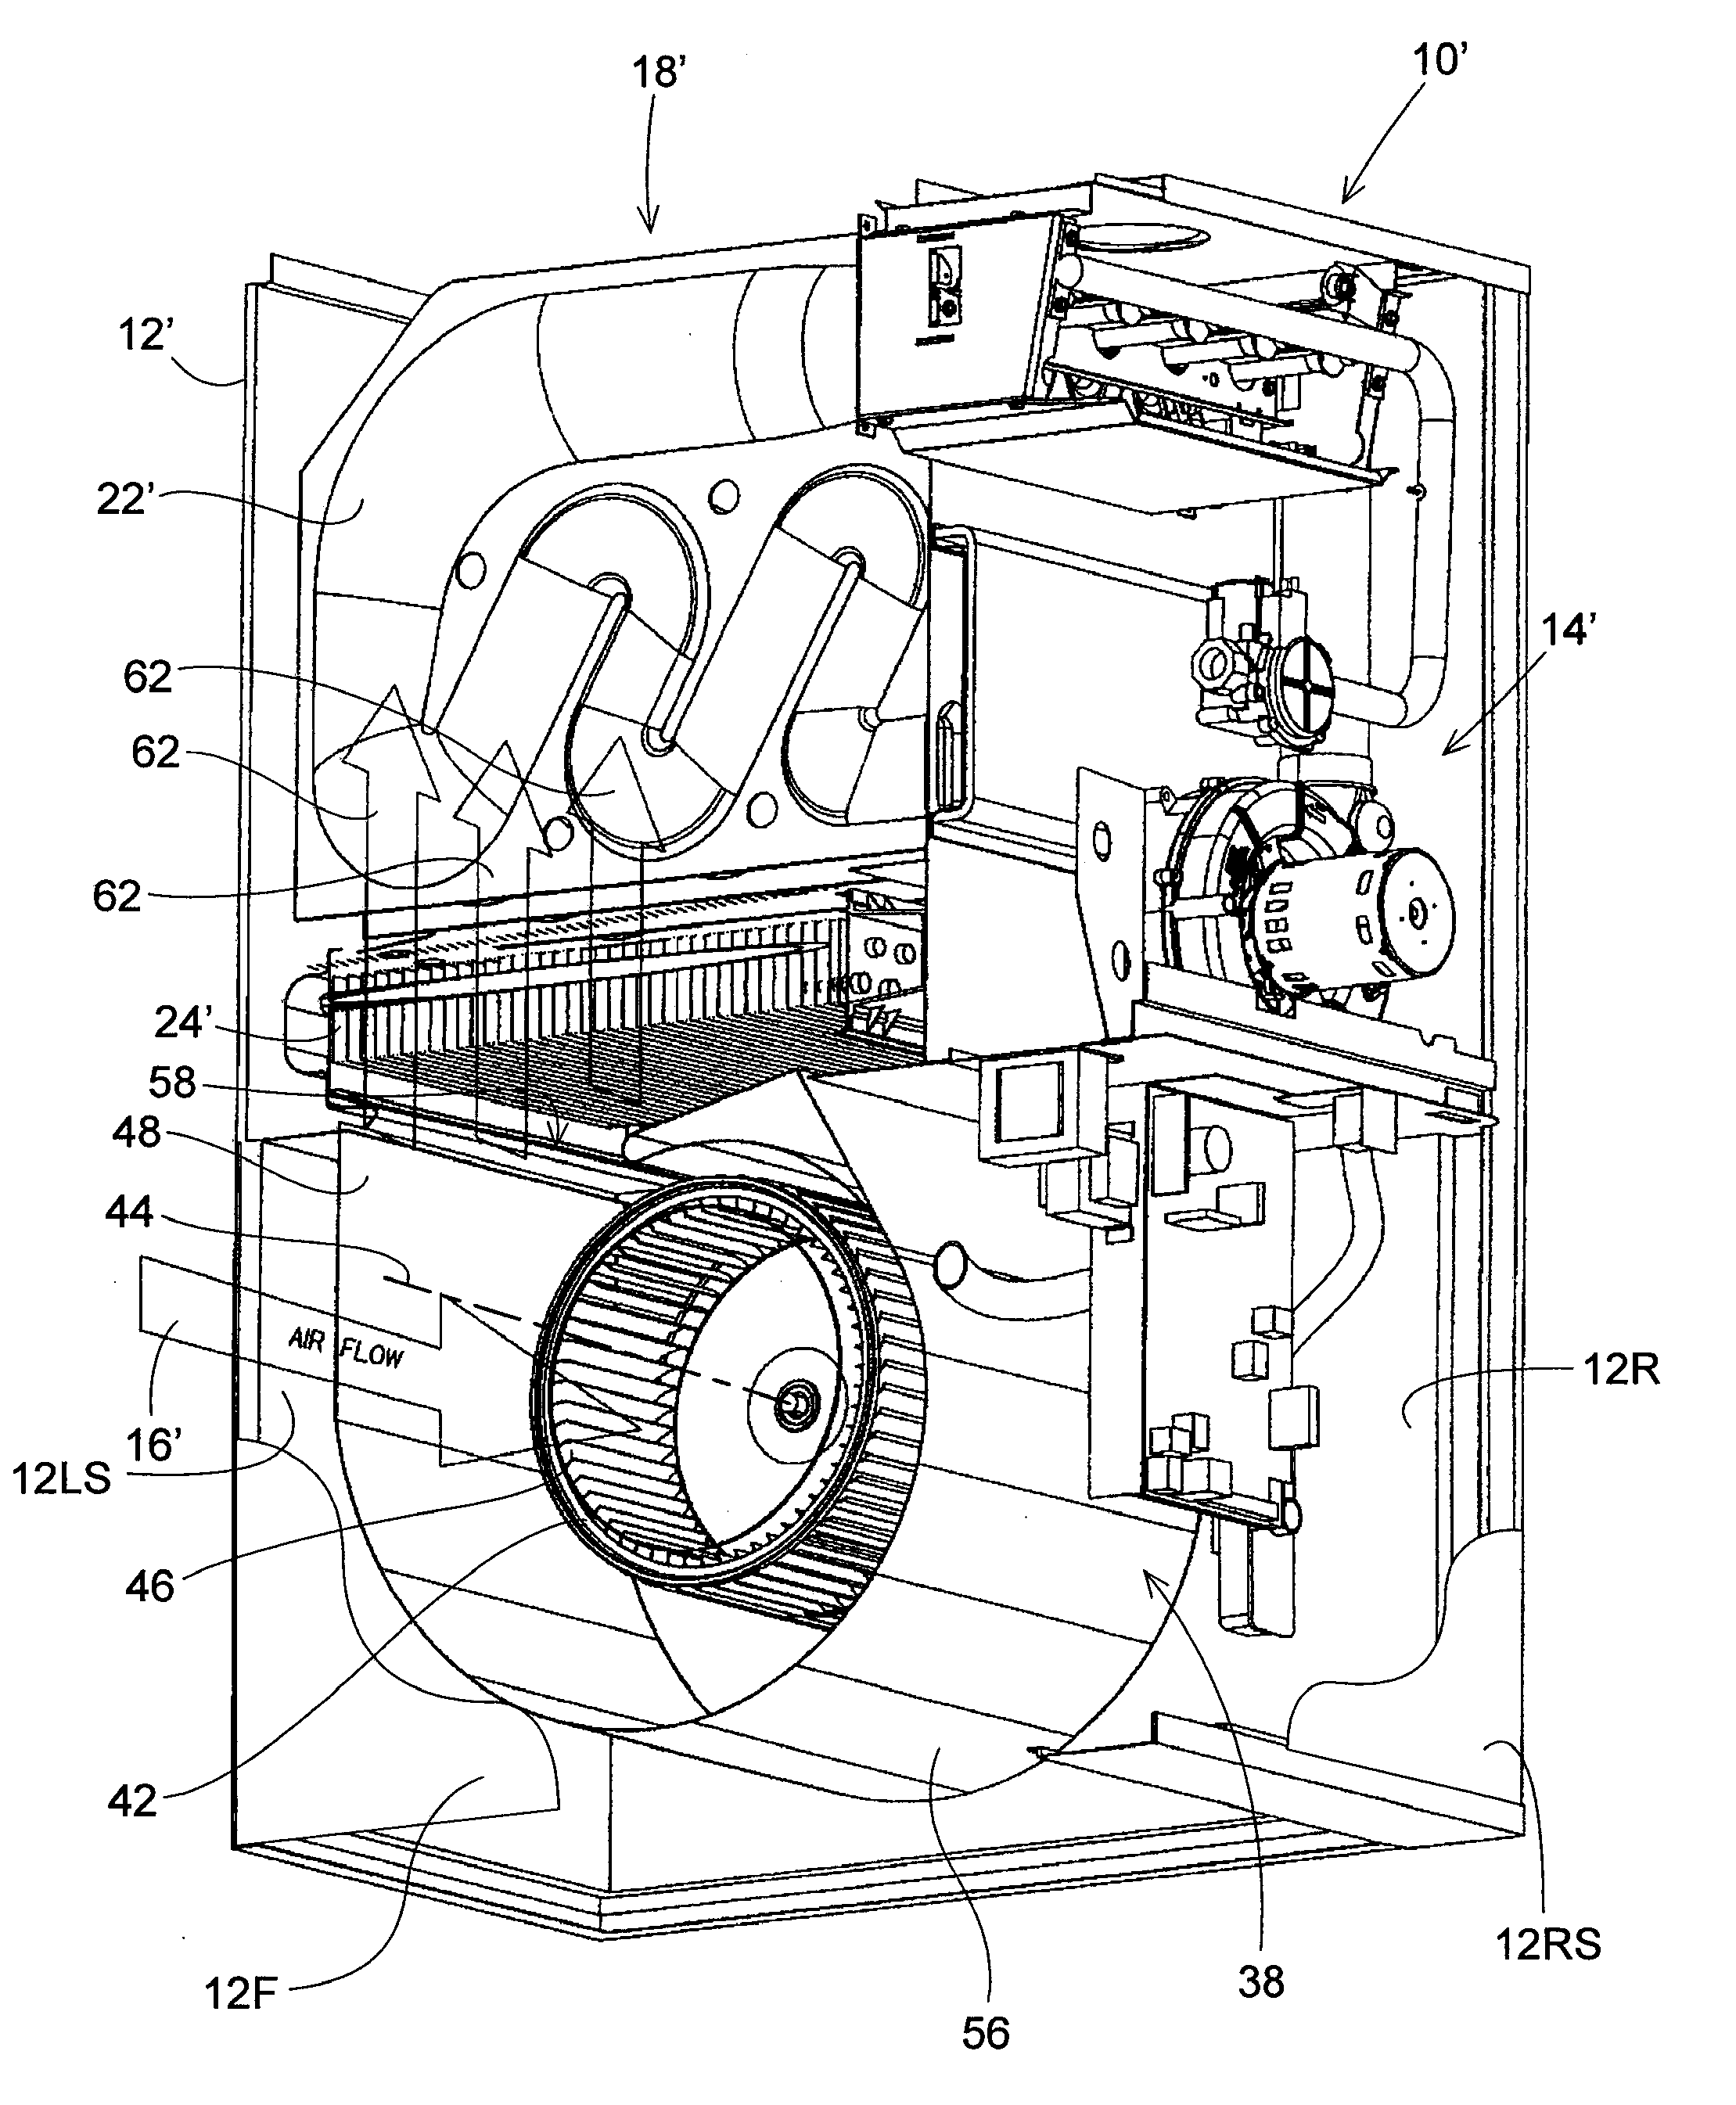 High Efficiency Furnace/Air Handler Blower Housing with a Side Wall Having an Exponentially Increasing Expansion Angle